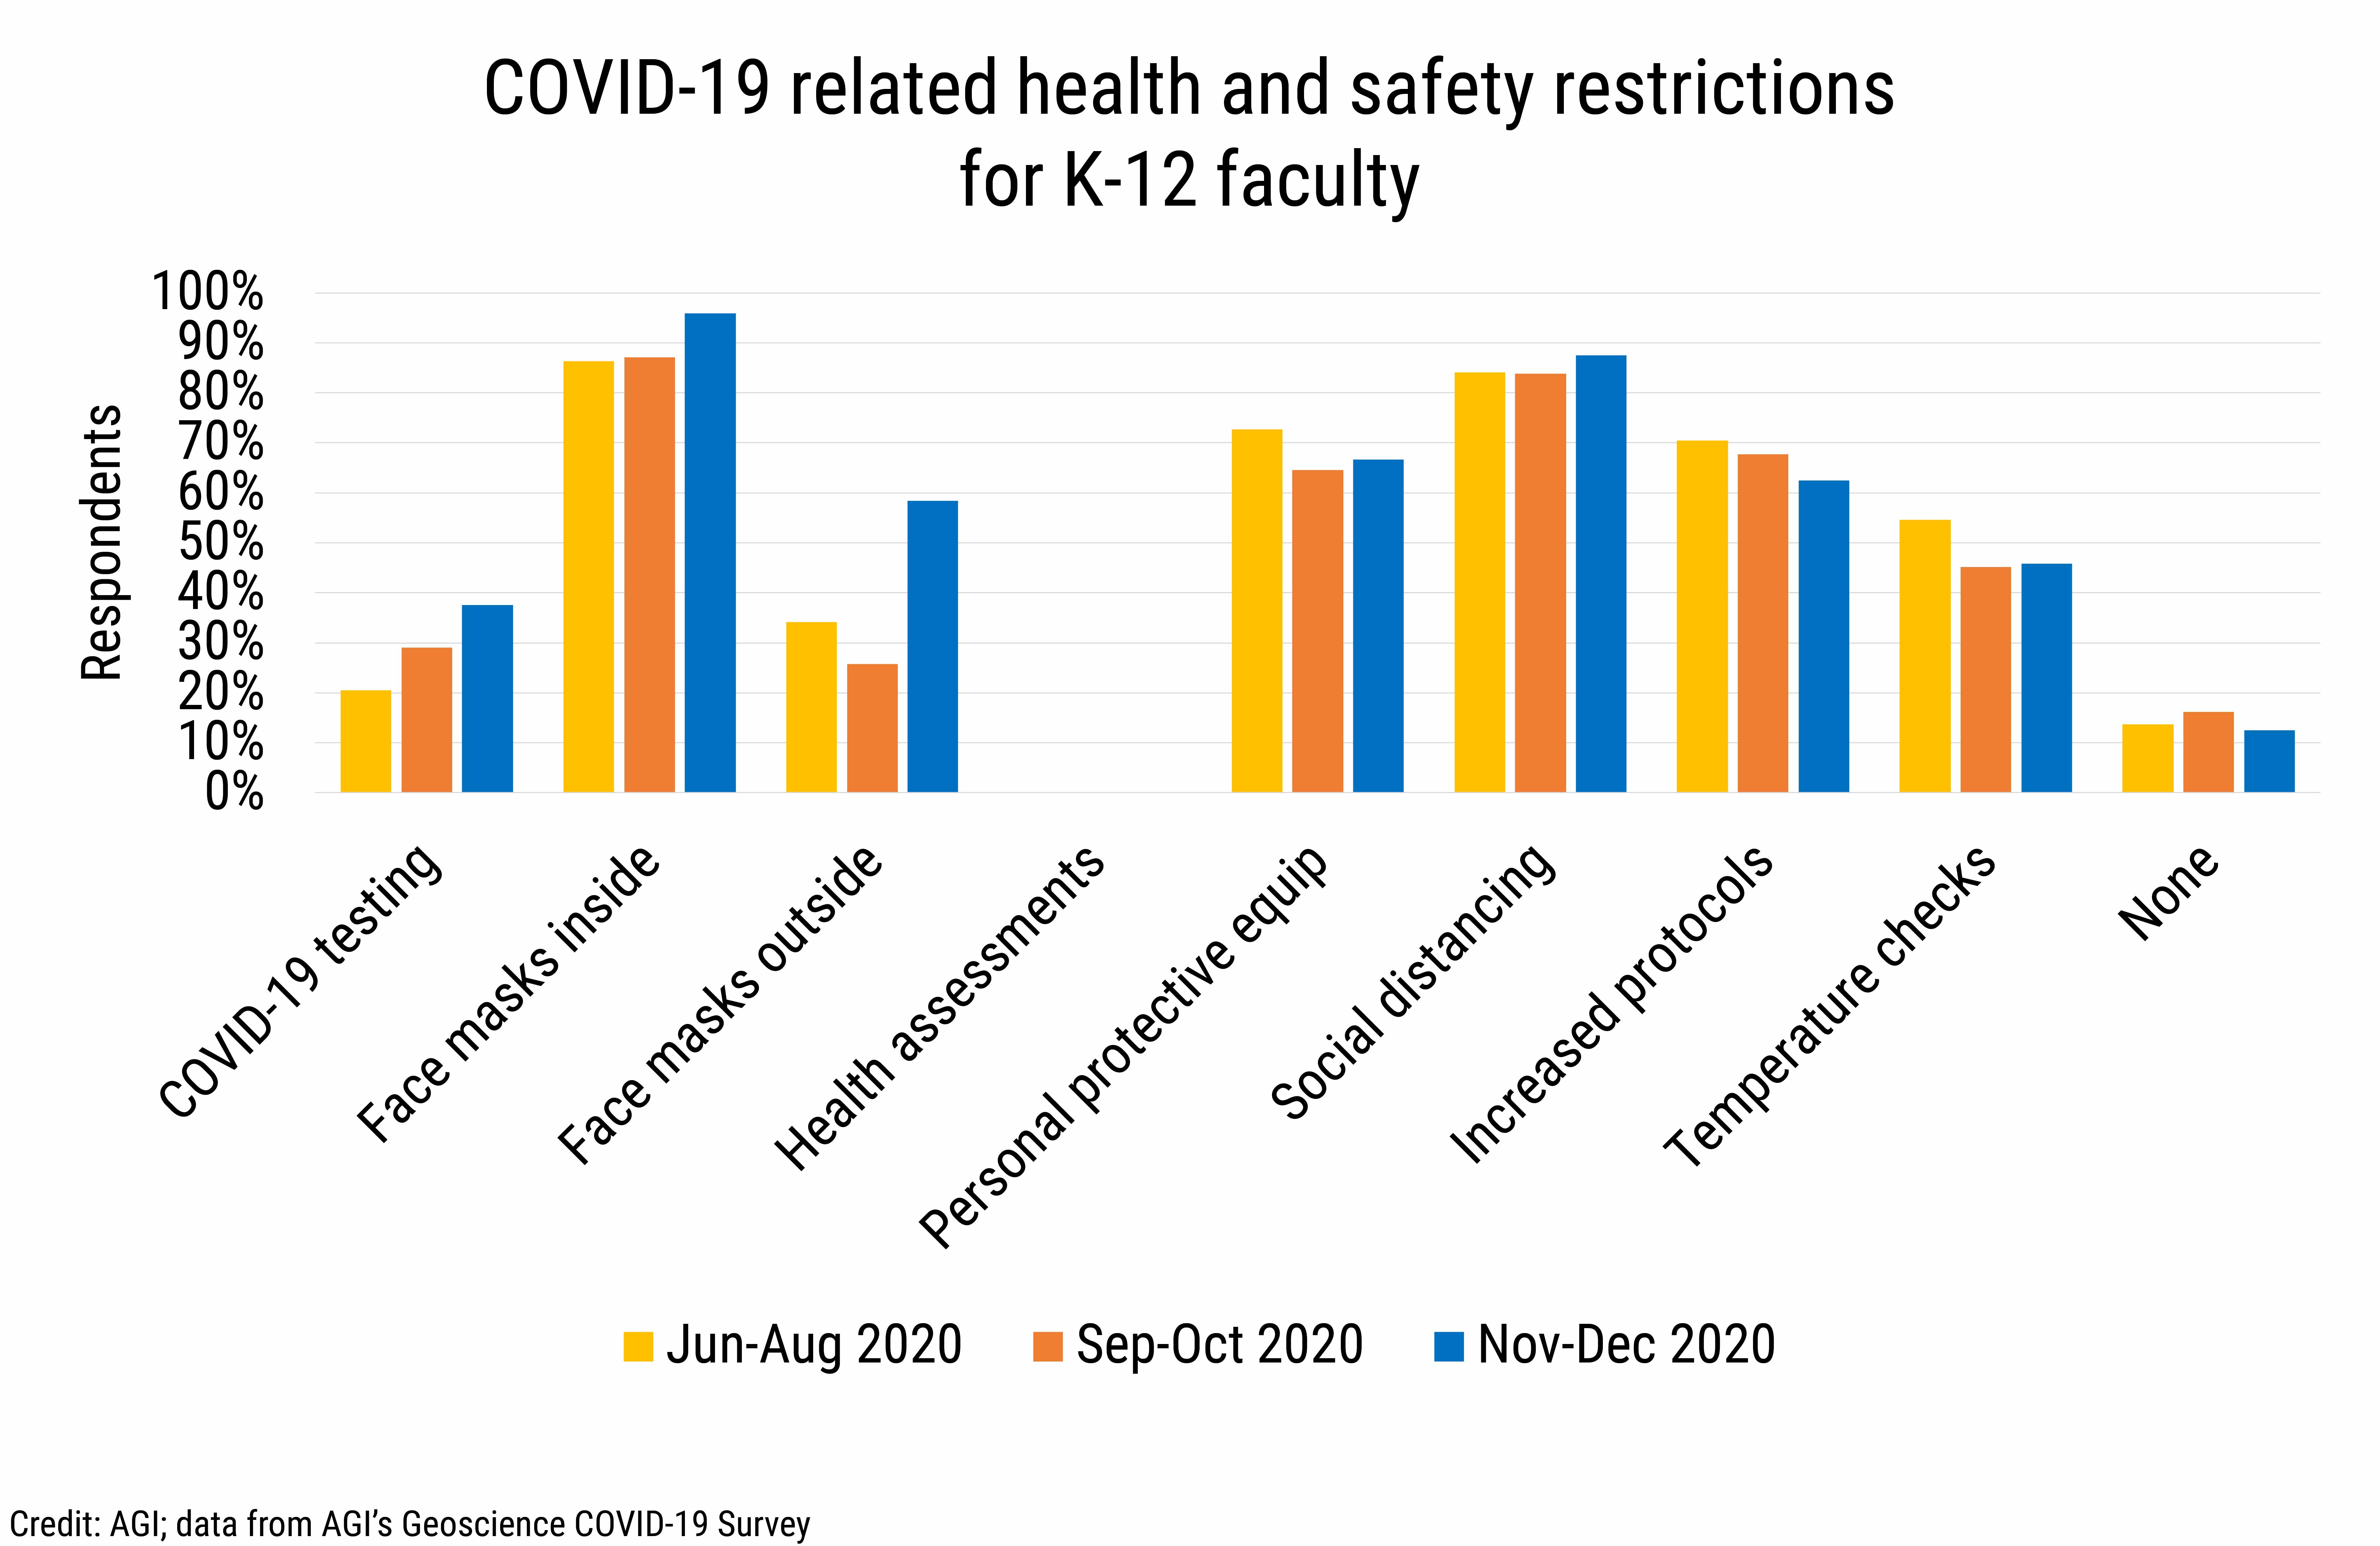 DB_2021-002 chart 08: COVID-19 related health and safety restrictions for K-12 faculty (Credit: AGI; data from AGI's Geoscience COVID-19 Survey)